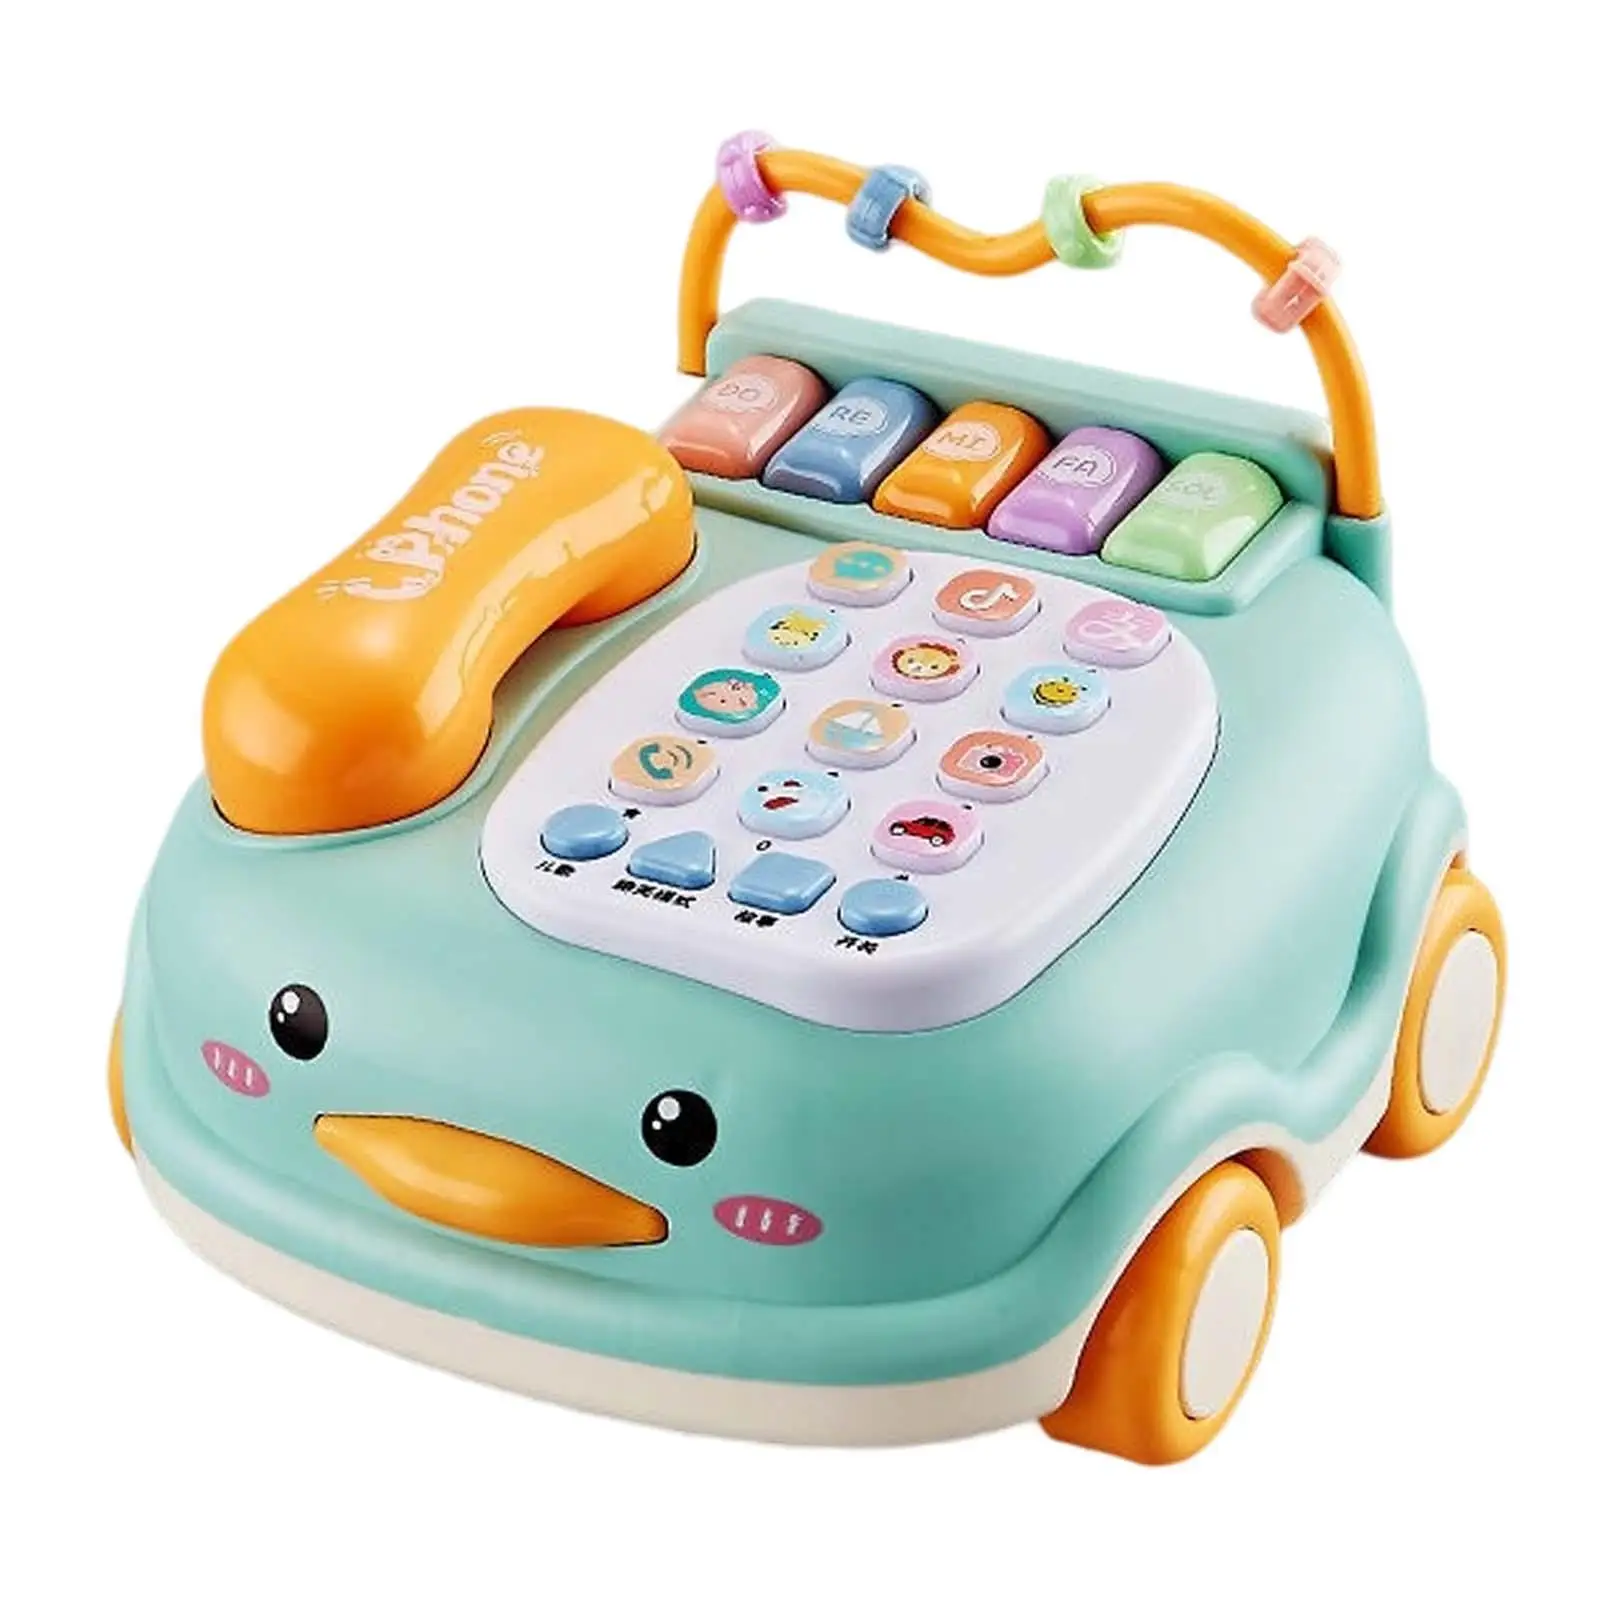 Cognitive Development Toy Lights Sensory Toy Pretend Phone Baby Toy Phone for 3 Years Old Preschool Educational Learning Boy